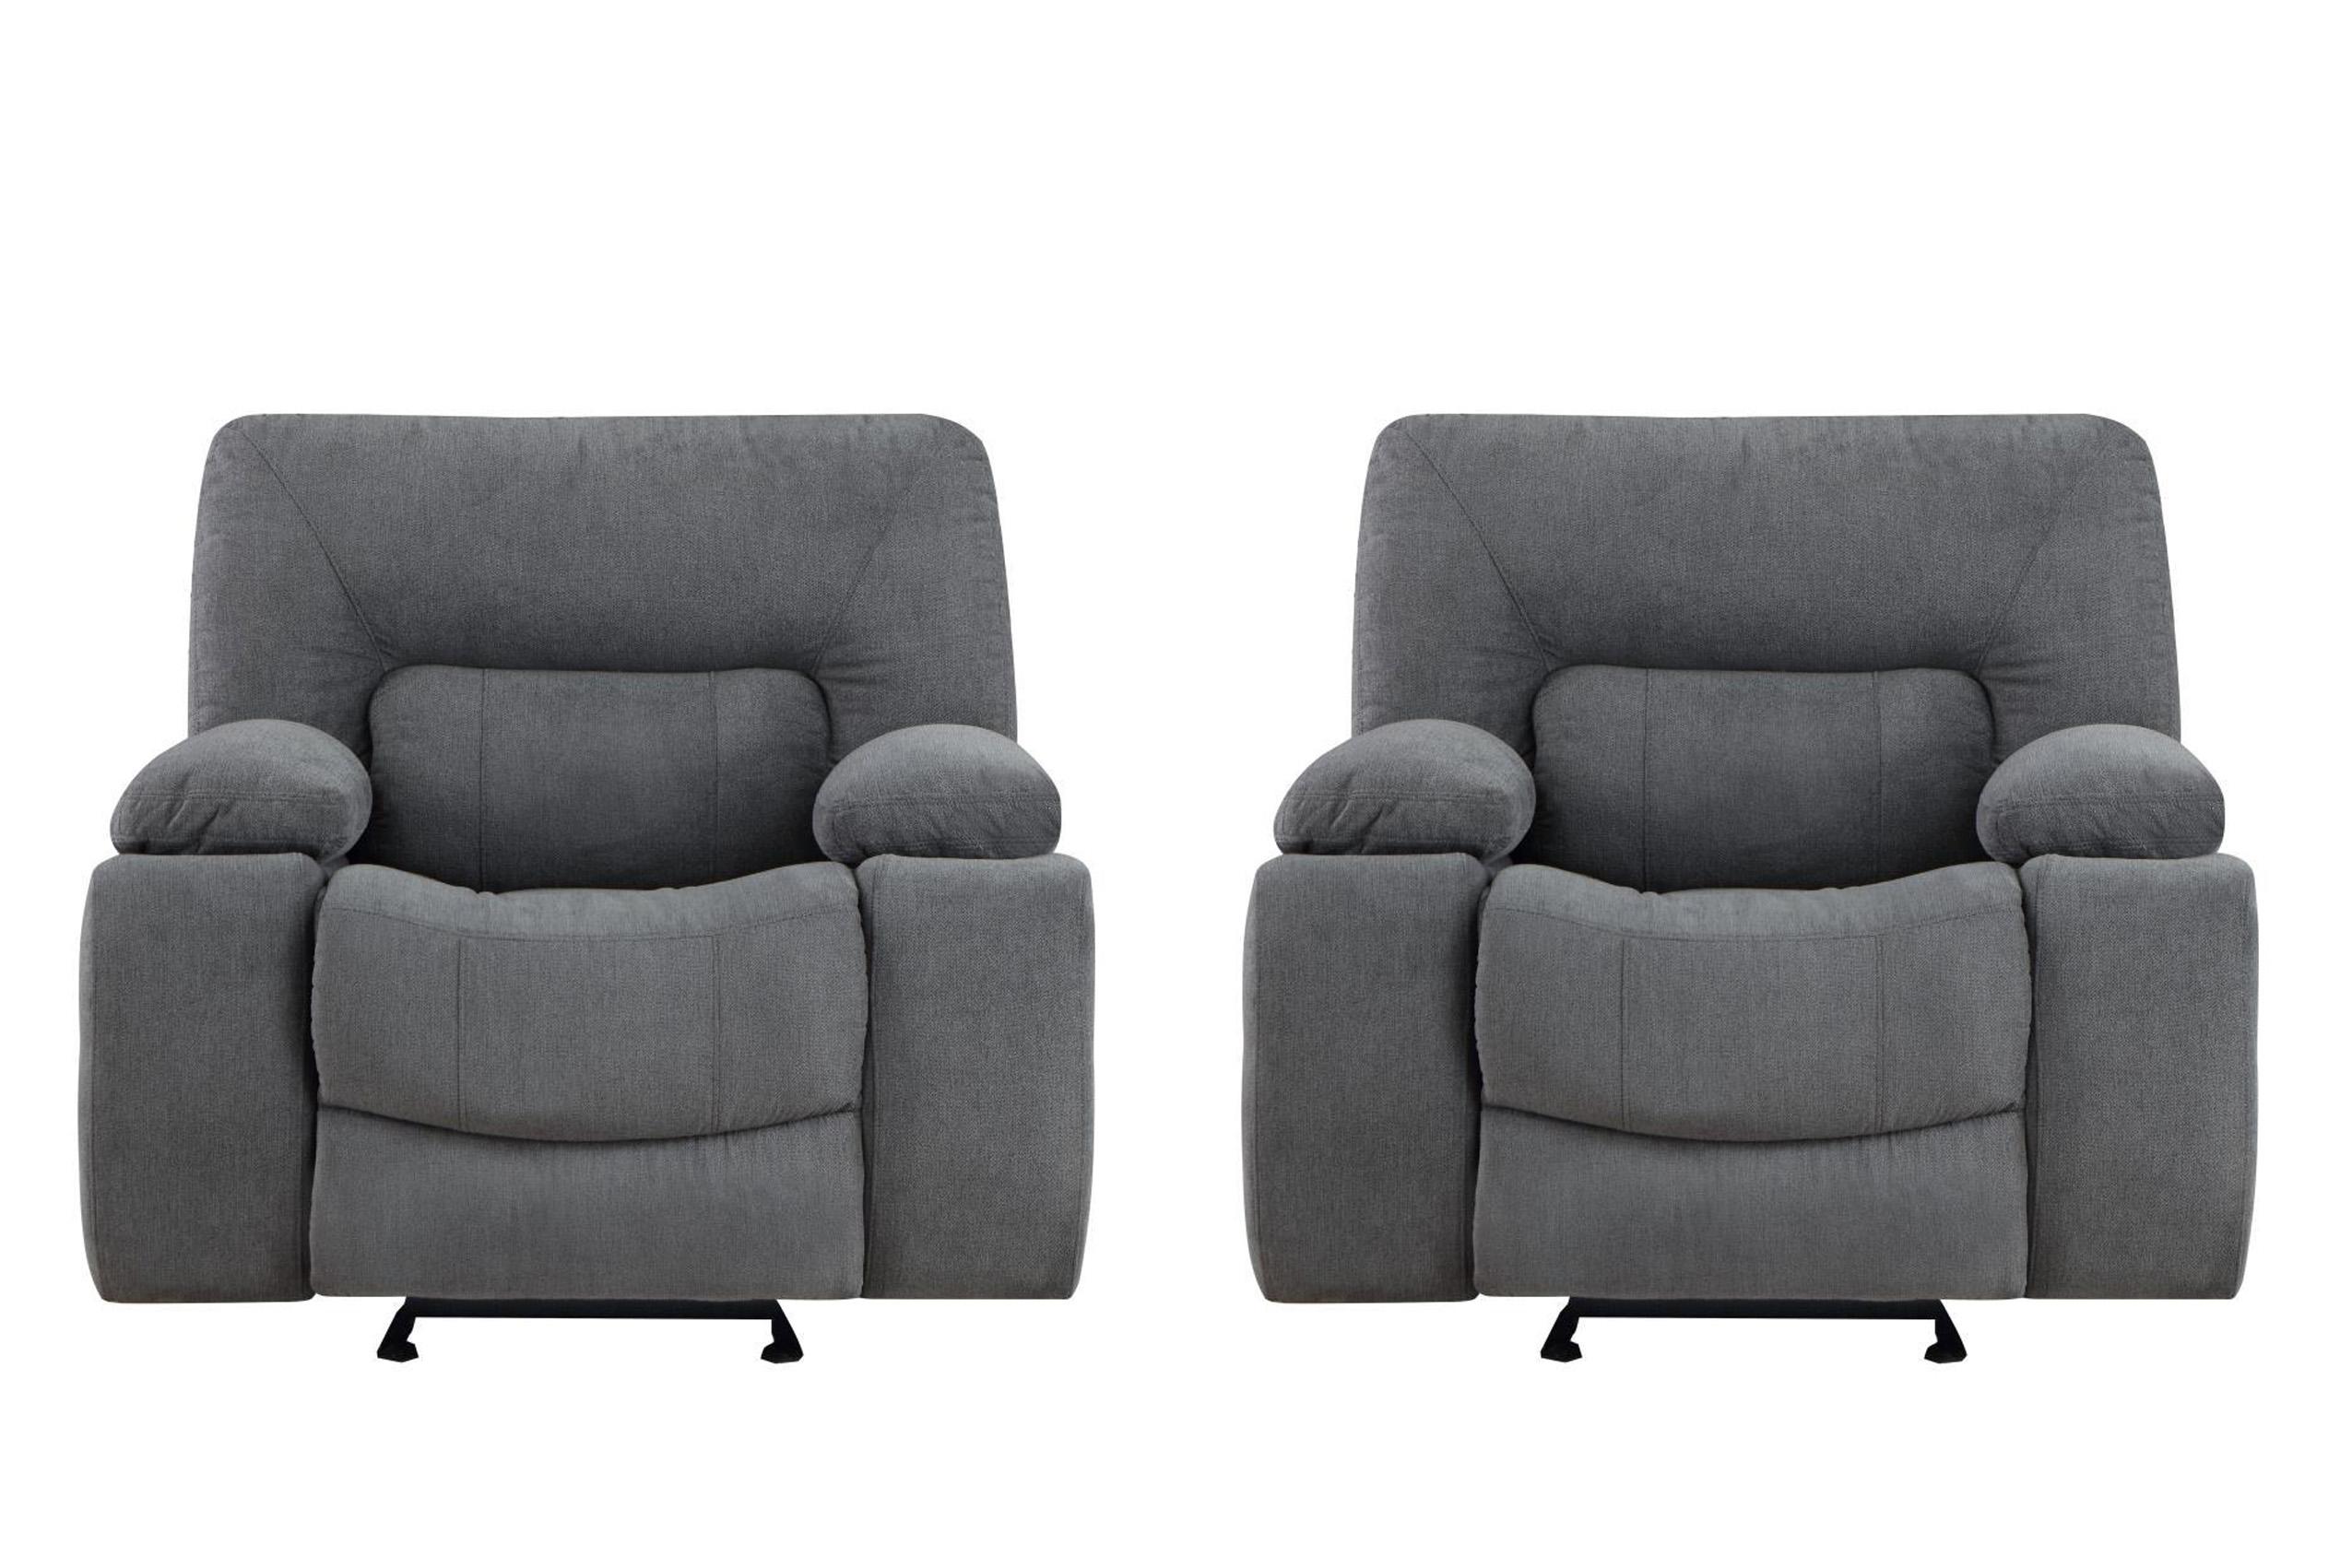 Contemporary, Modern Recliner Chair Set OHIO-GR OHIO-GR-CH-Set-2 in Gray Chenille